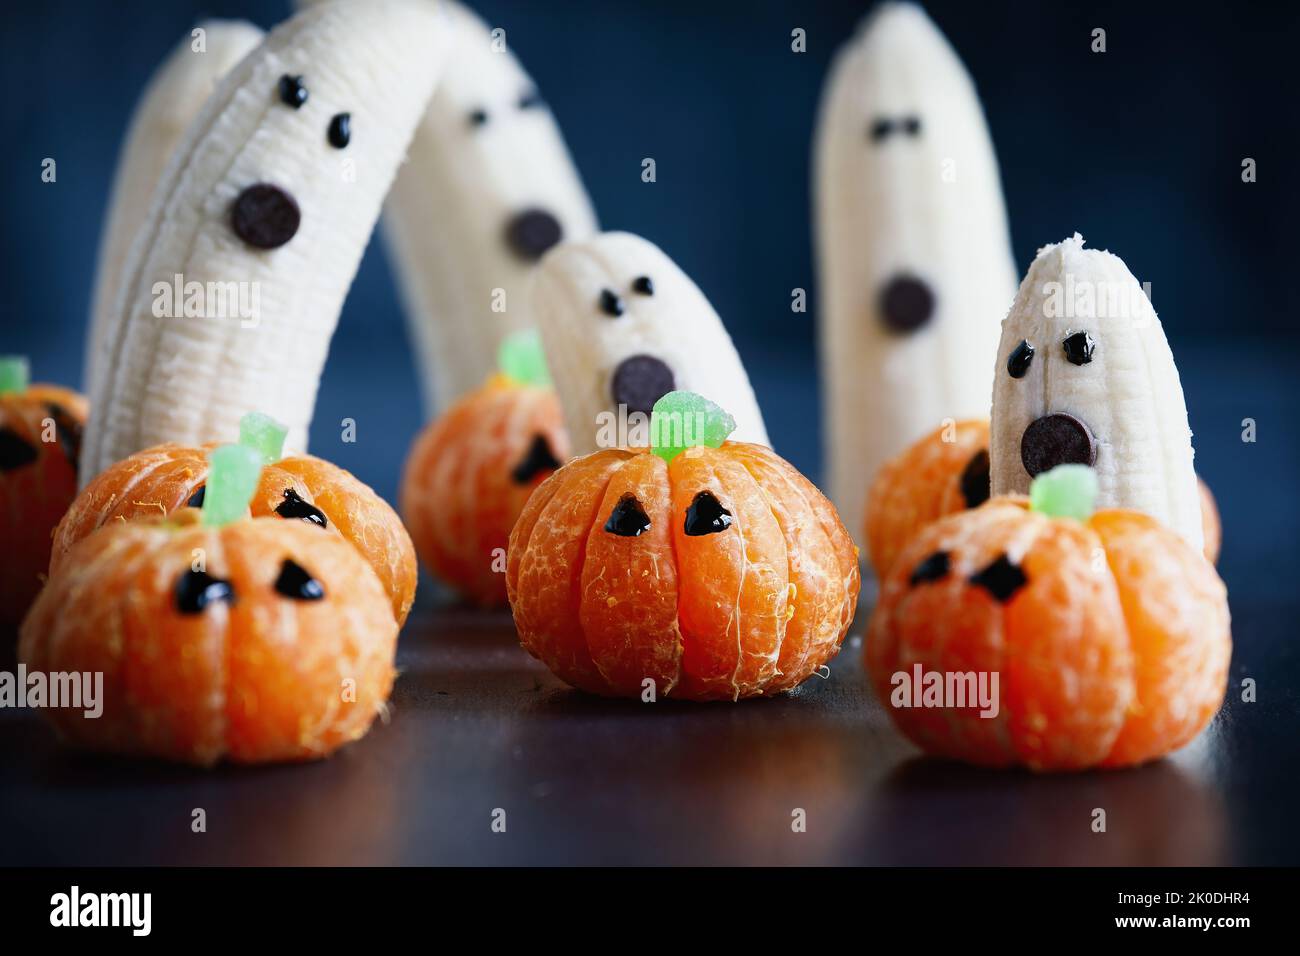 Halloween cute pumpkin orange fruit with scary banana ghosts monsters with chocolate faces behind them. Healthy dessert snack with funny faces. Stock Photo